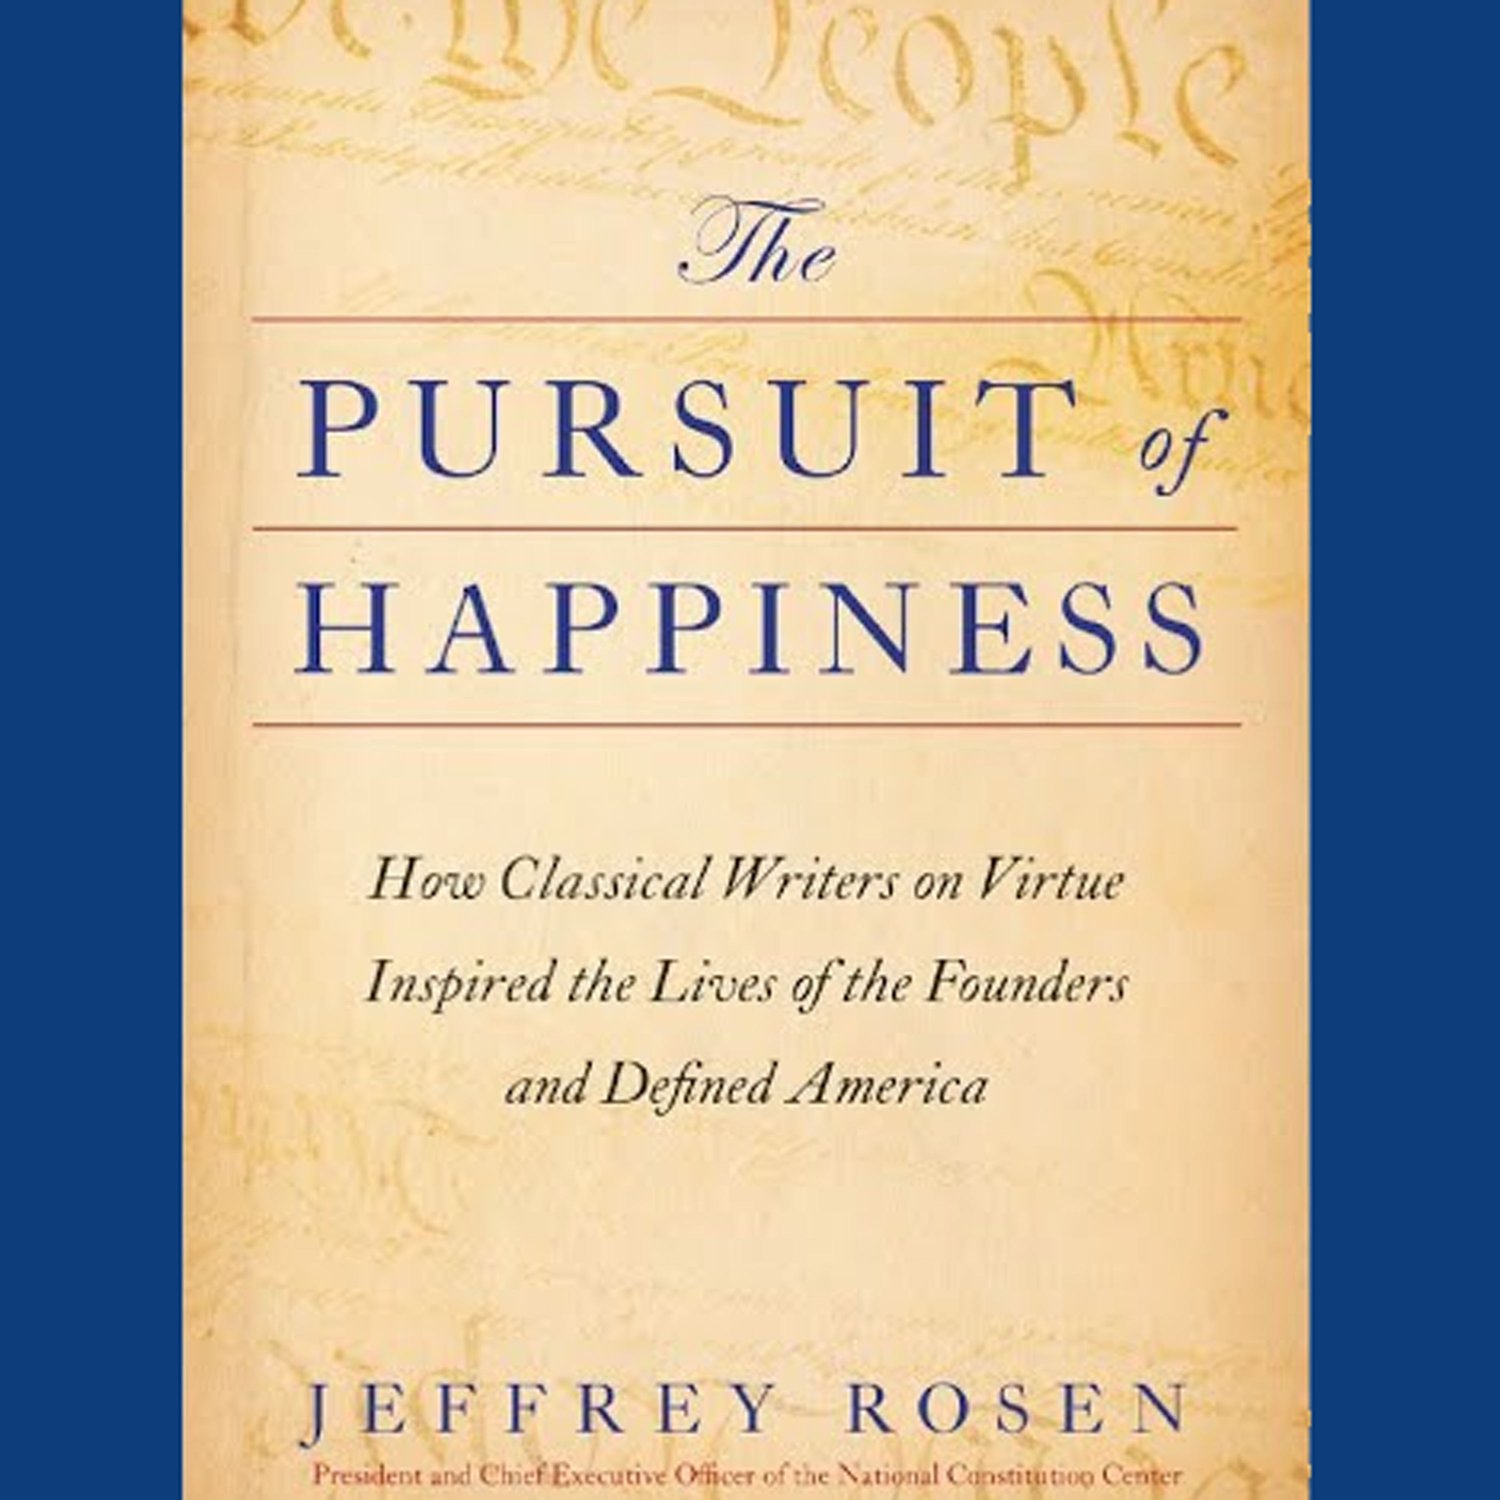 How to Live a Good a Life - Stoic Wisdom & the Founding Fathers - Highlights - JEFFREY ROSEN